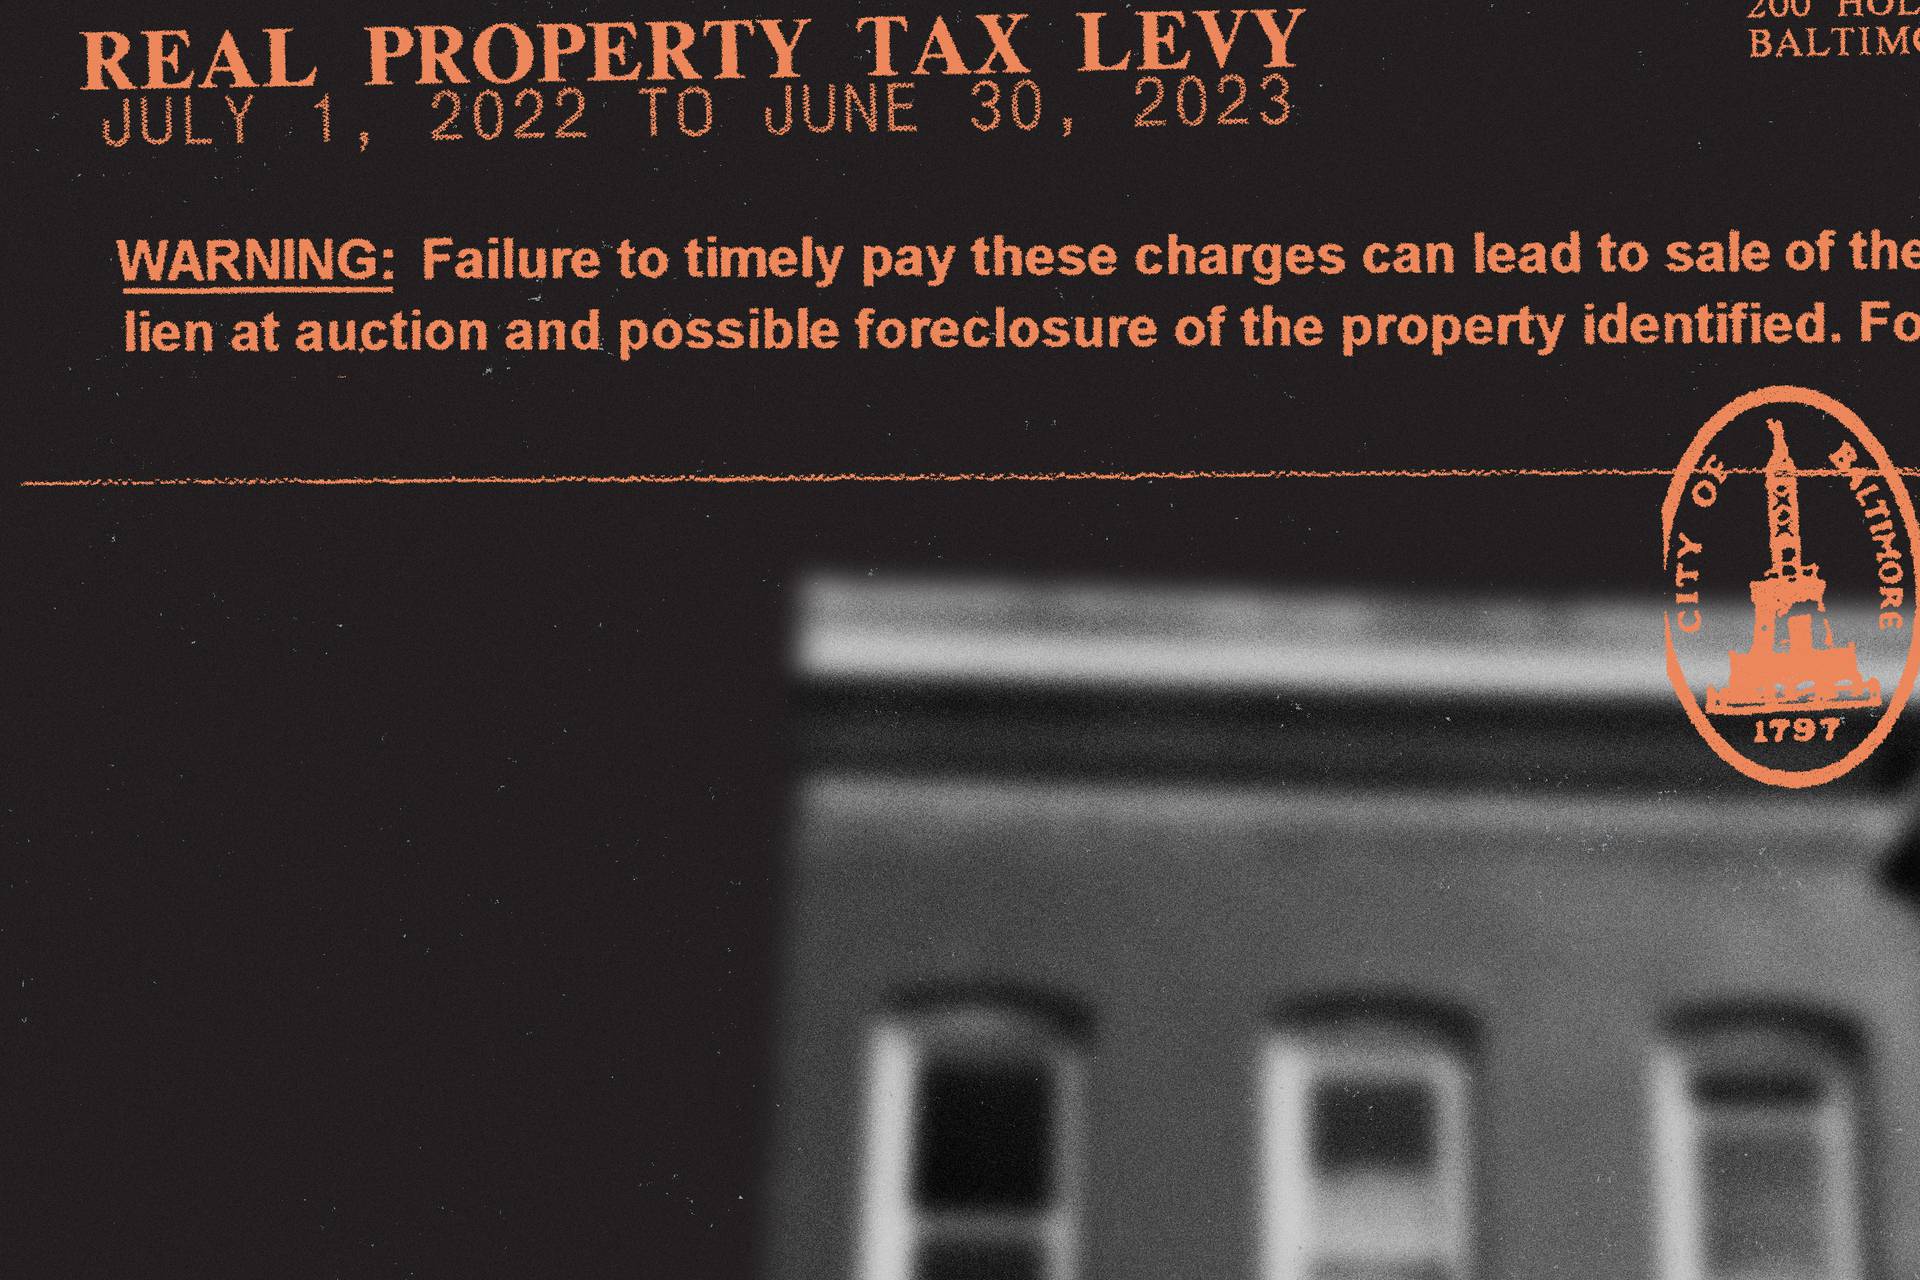 Photo collage of property tax bill with warning about tax lien being sold at auction, seal of city of Baltimore, and blurry top of a row house.